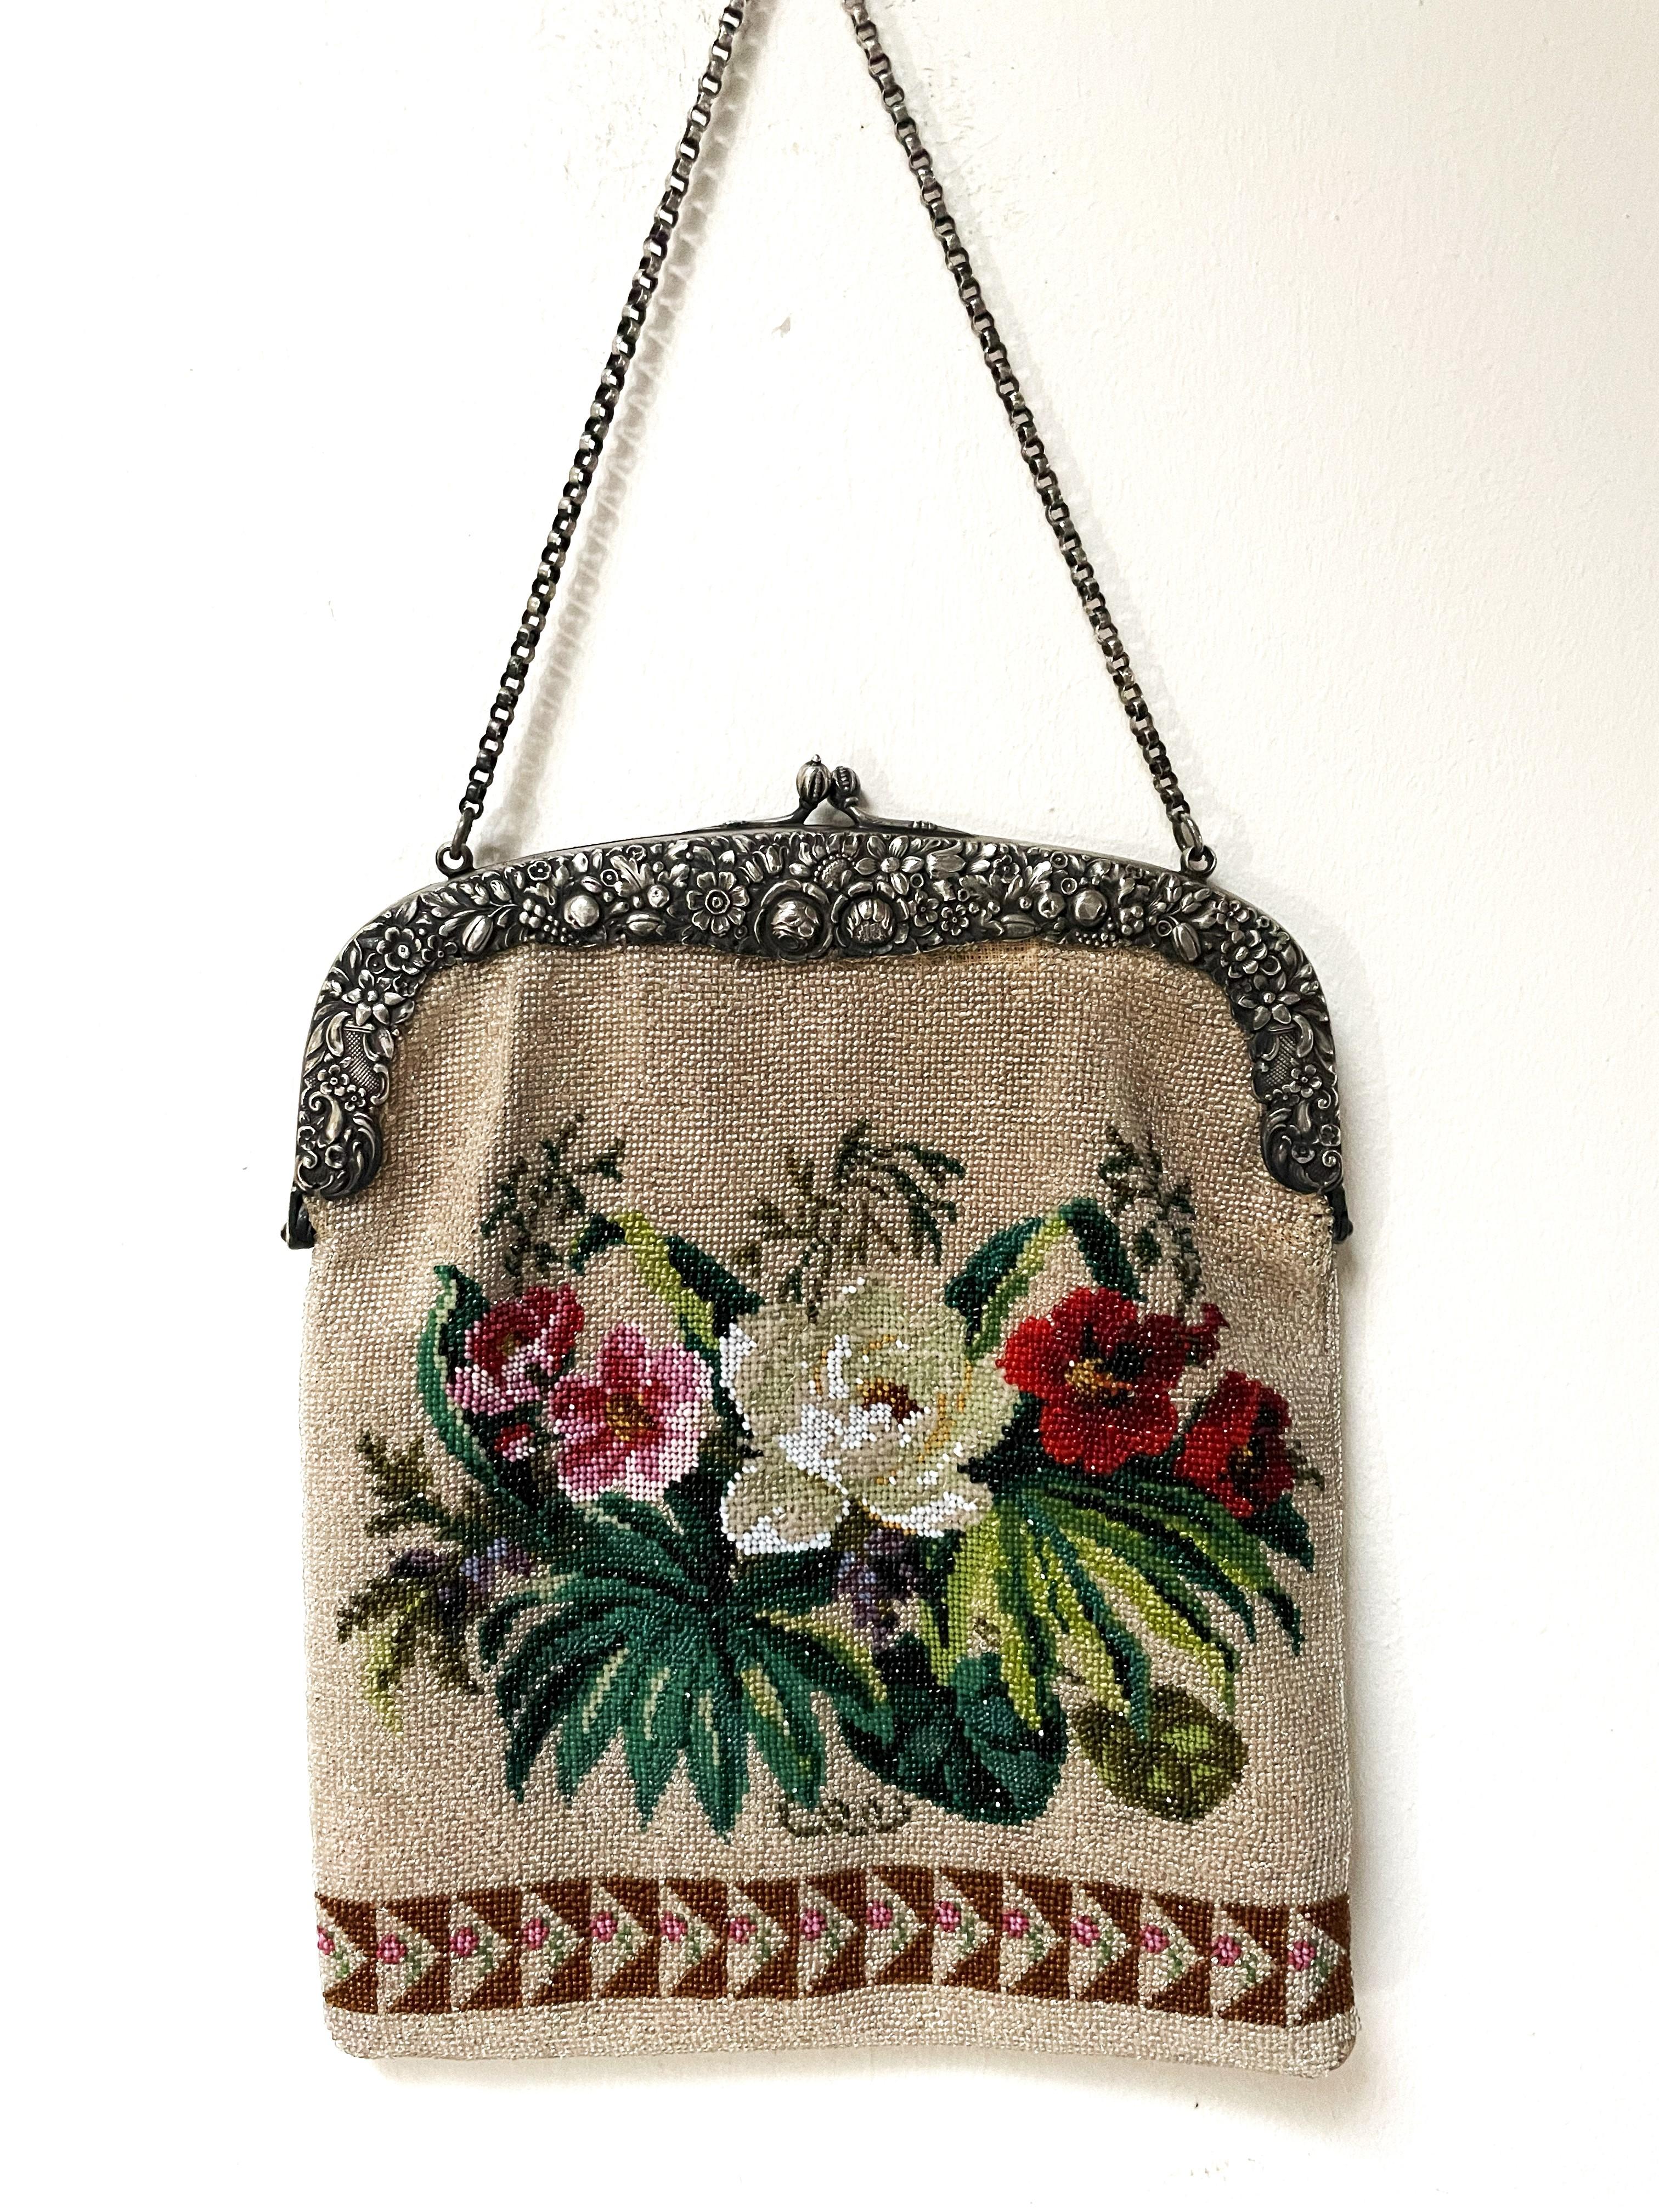 Antique hand-knitted beaded bag with hallmarked silver hanger + chain from 1850s For Sale 5